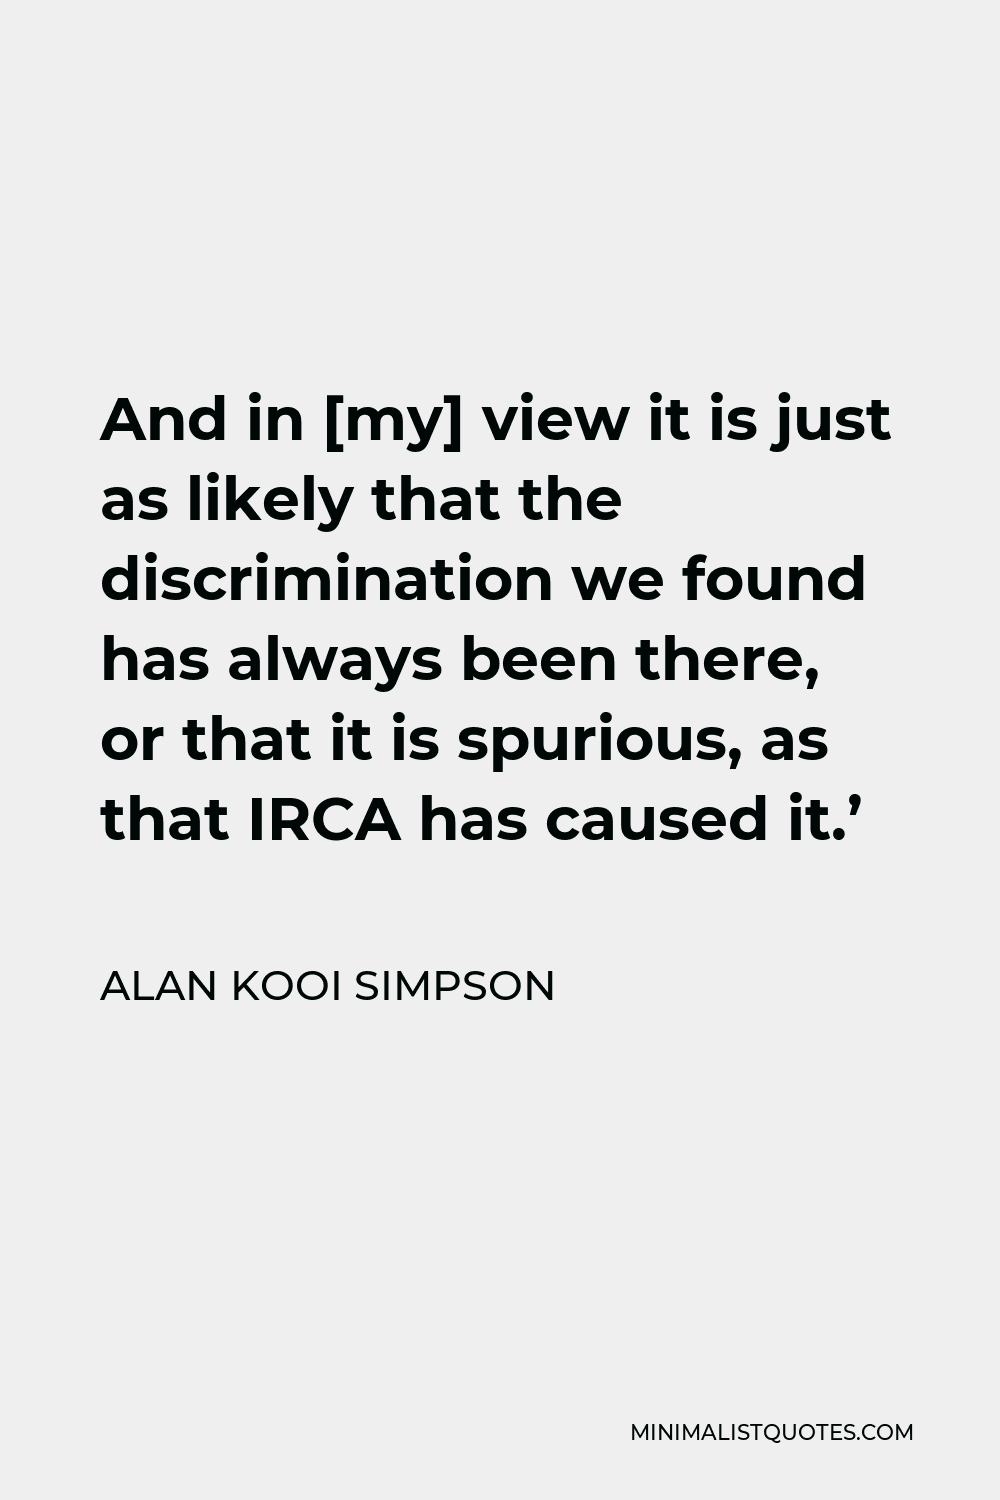 Alan Kooi Simpson Quote - And in [my] view it is just as likely that the discrimination we found has always been there, or that it is spurious, as that IRCA has caused it.’